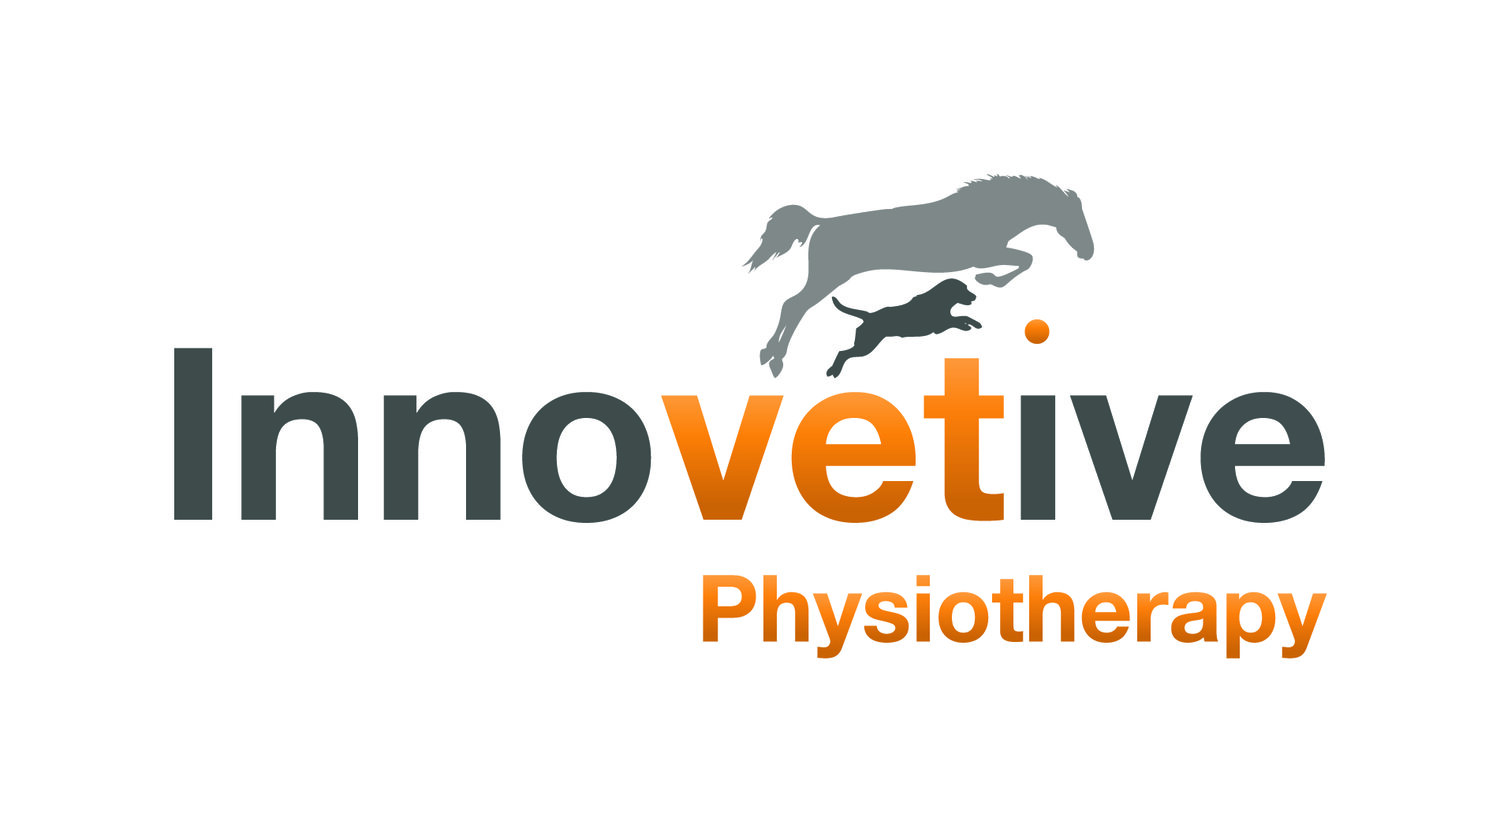 Innovetive Physiotherapy